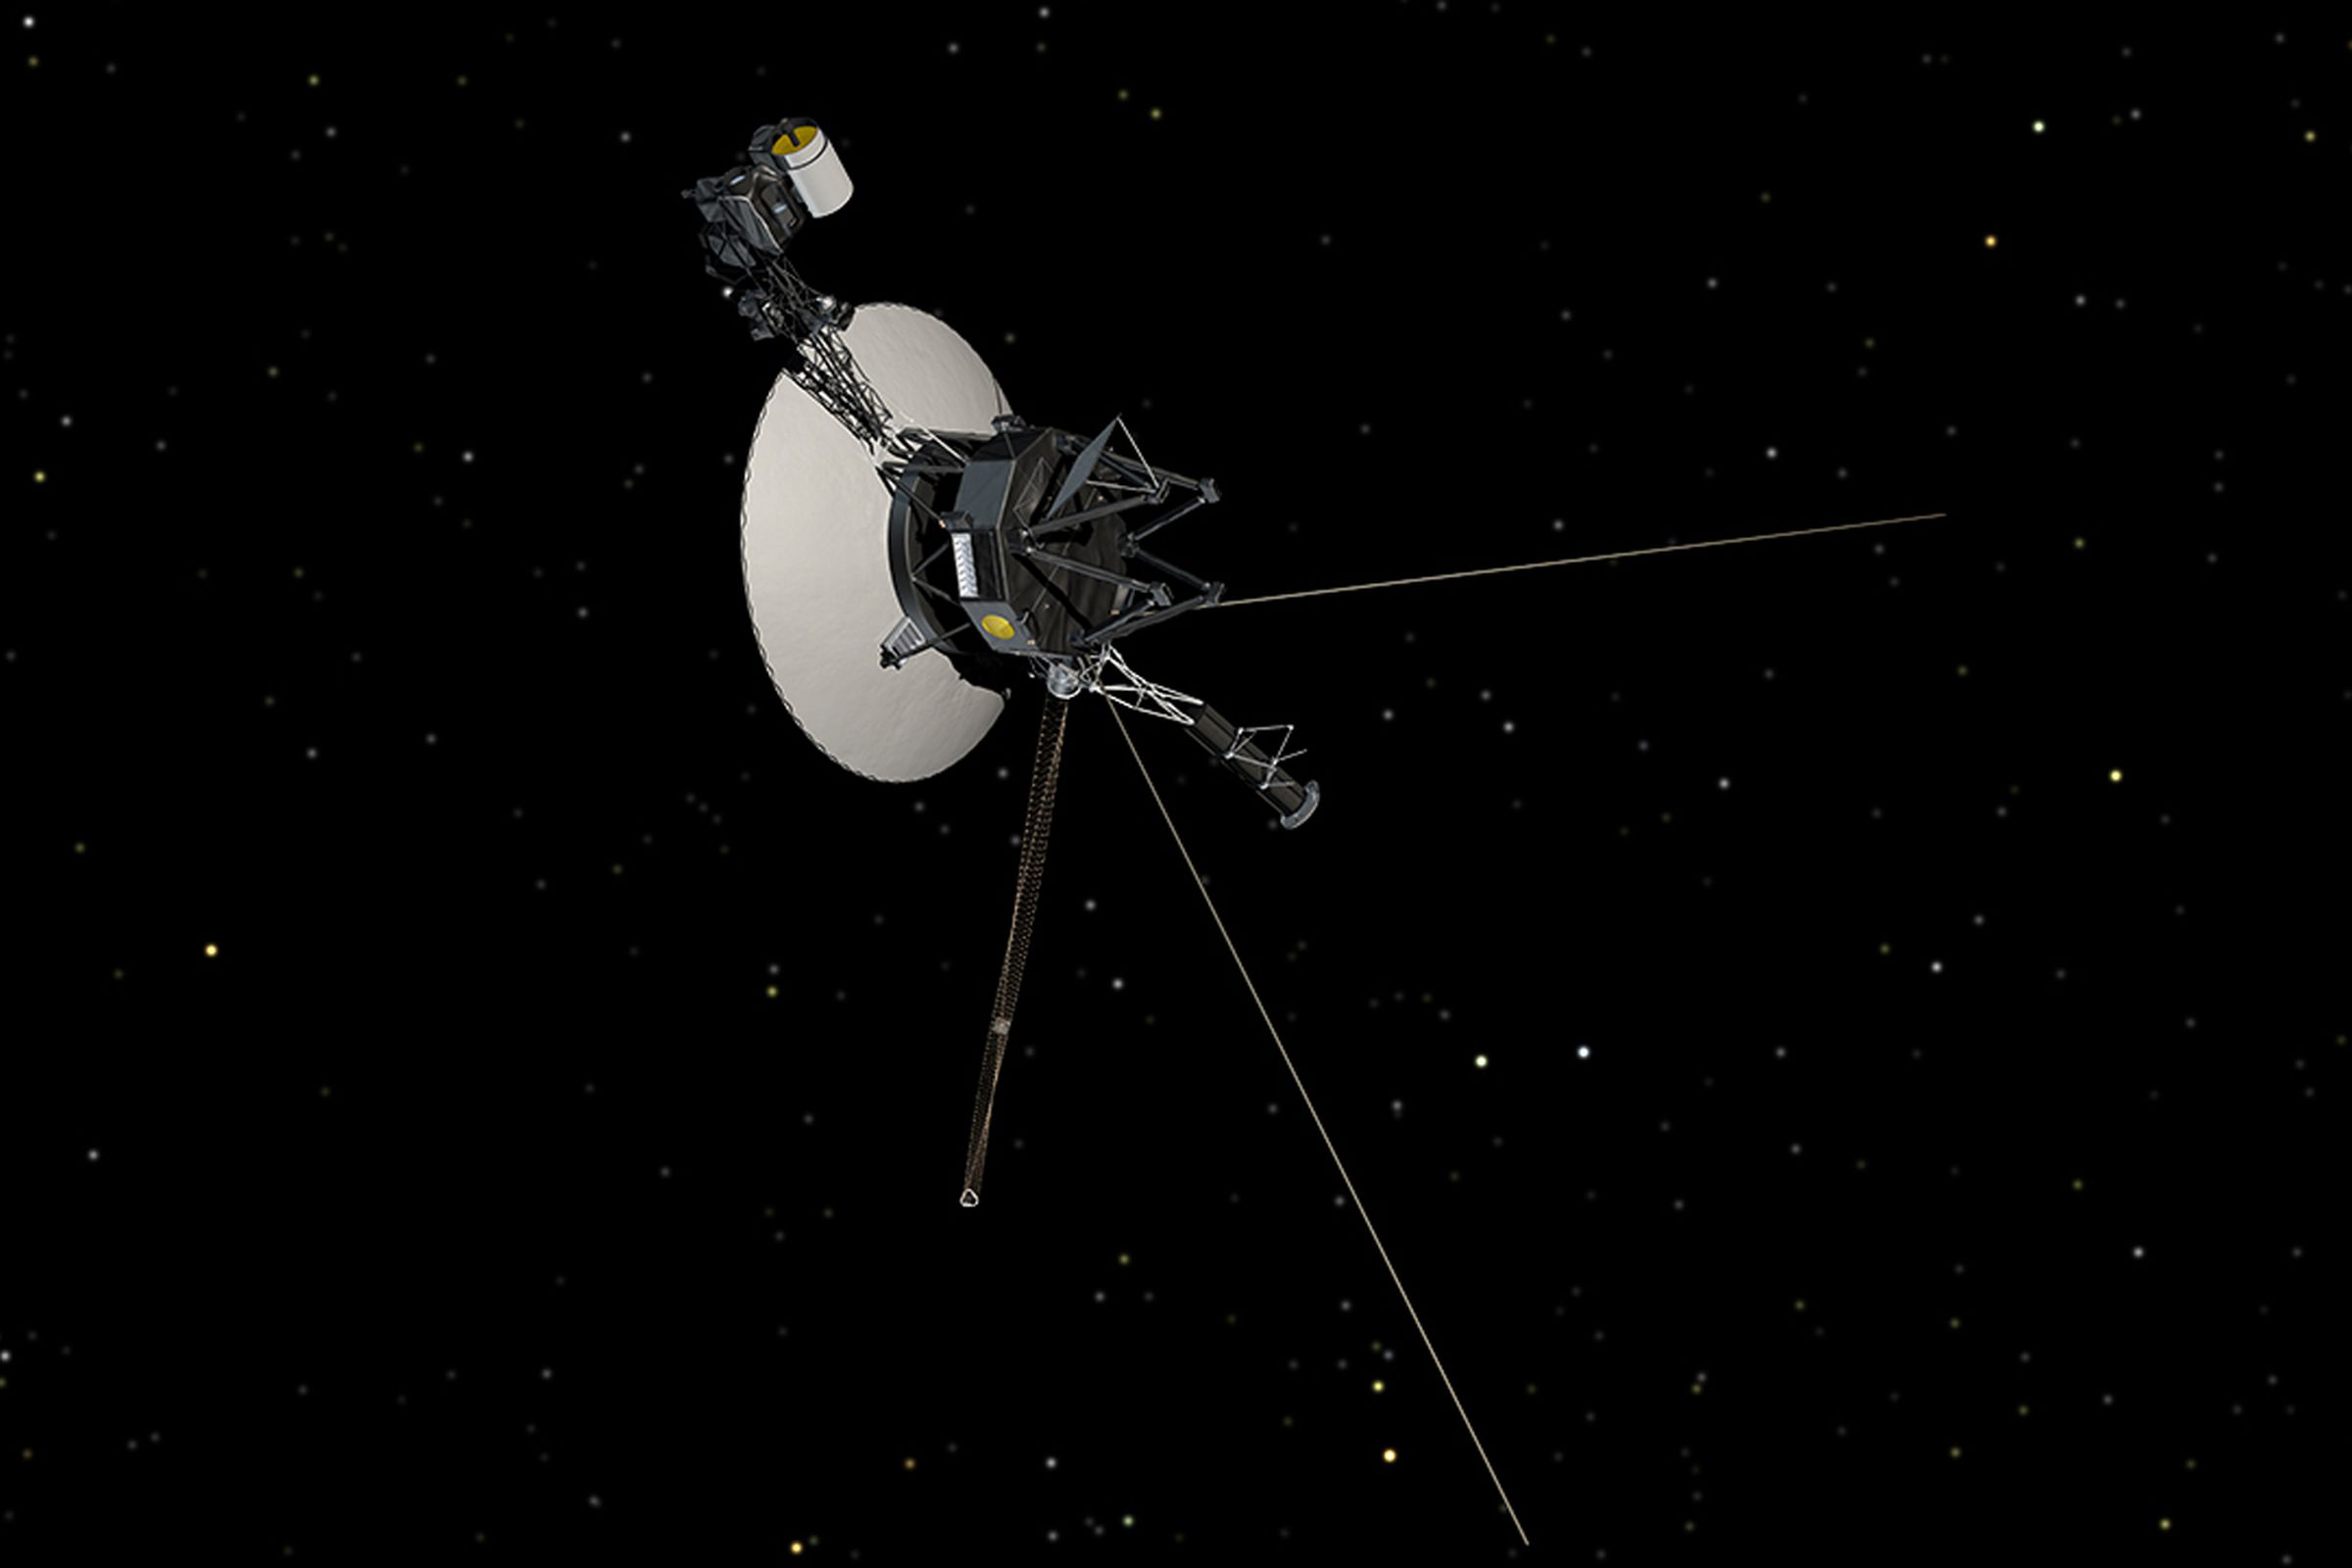 A render of Voyager 1 in space.